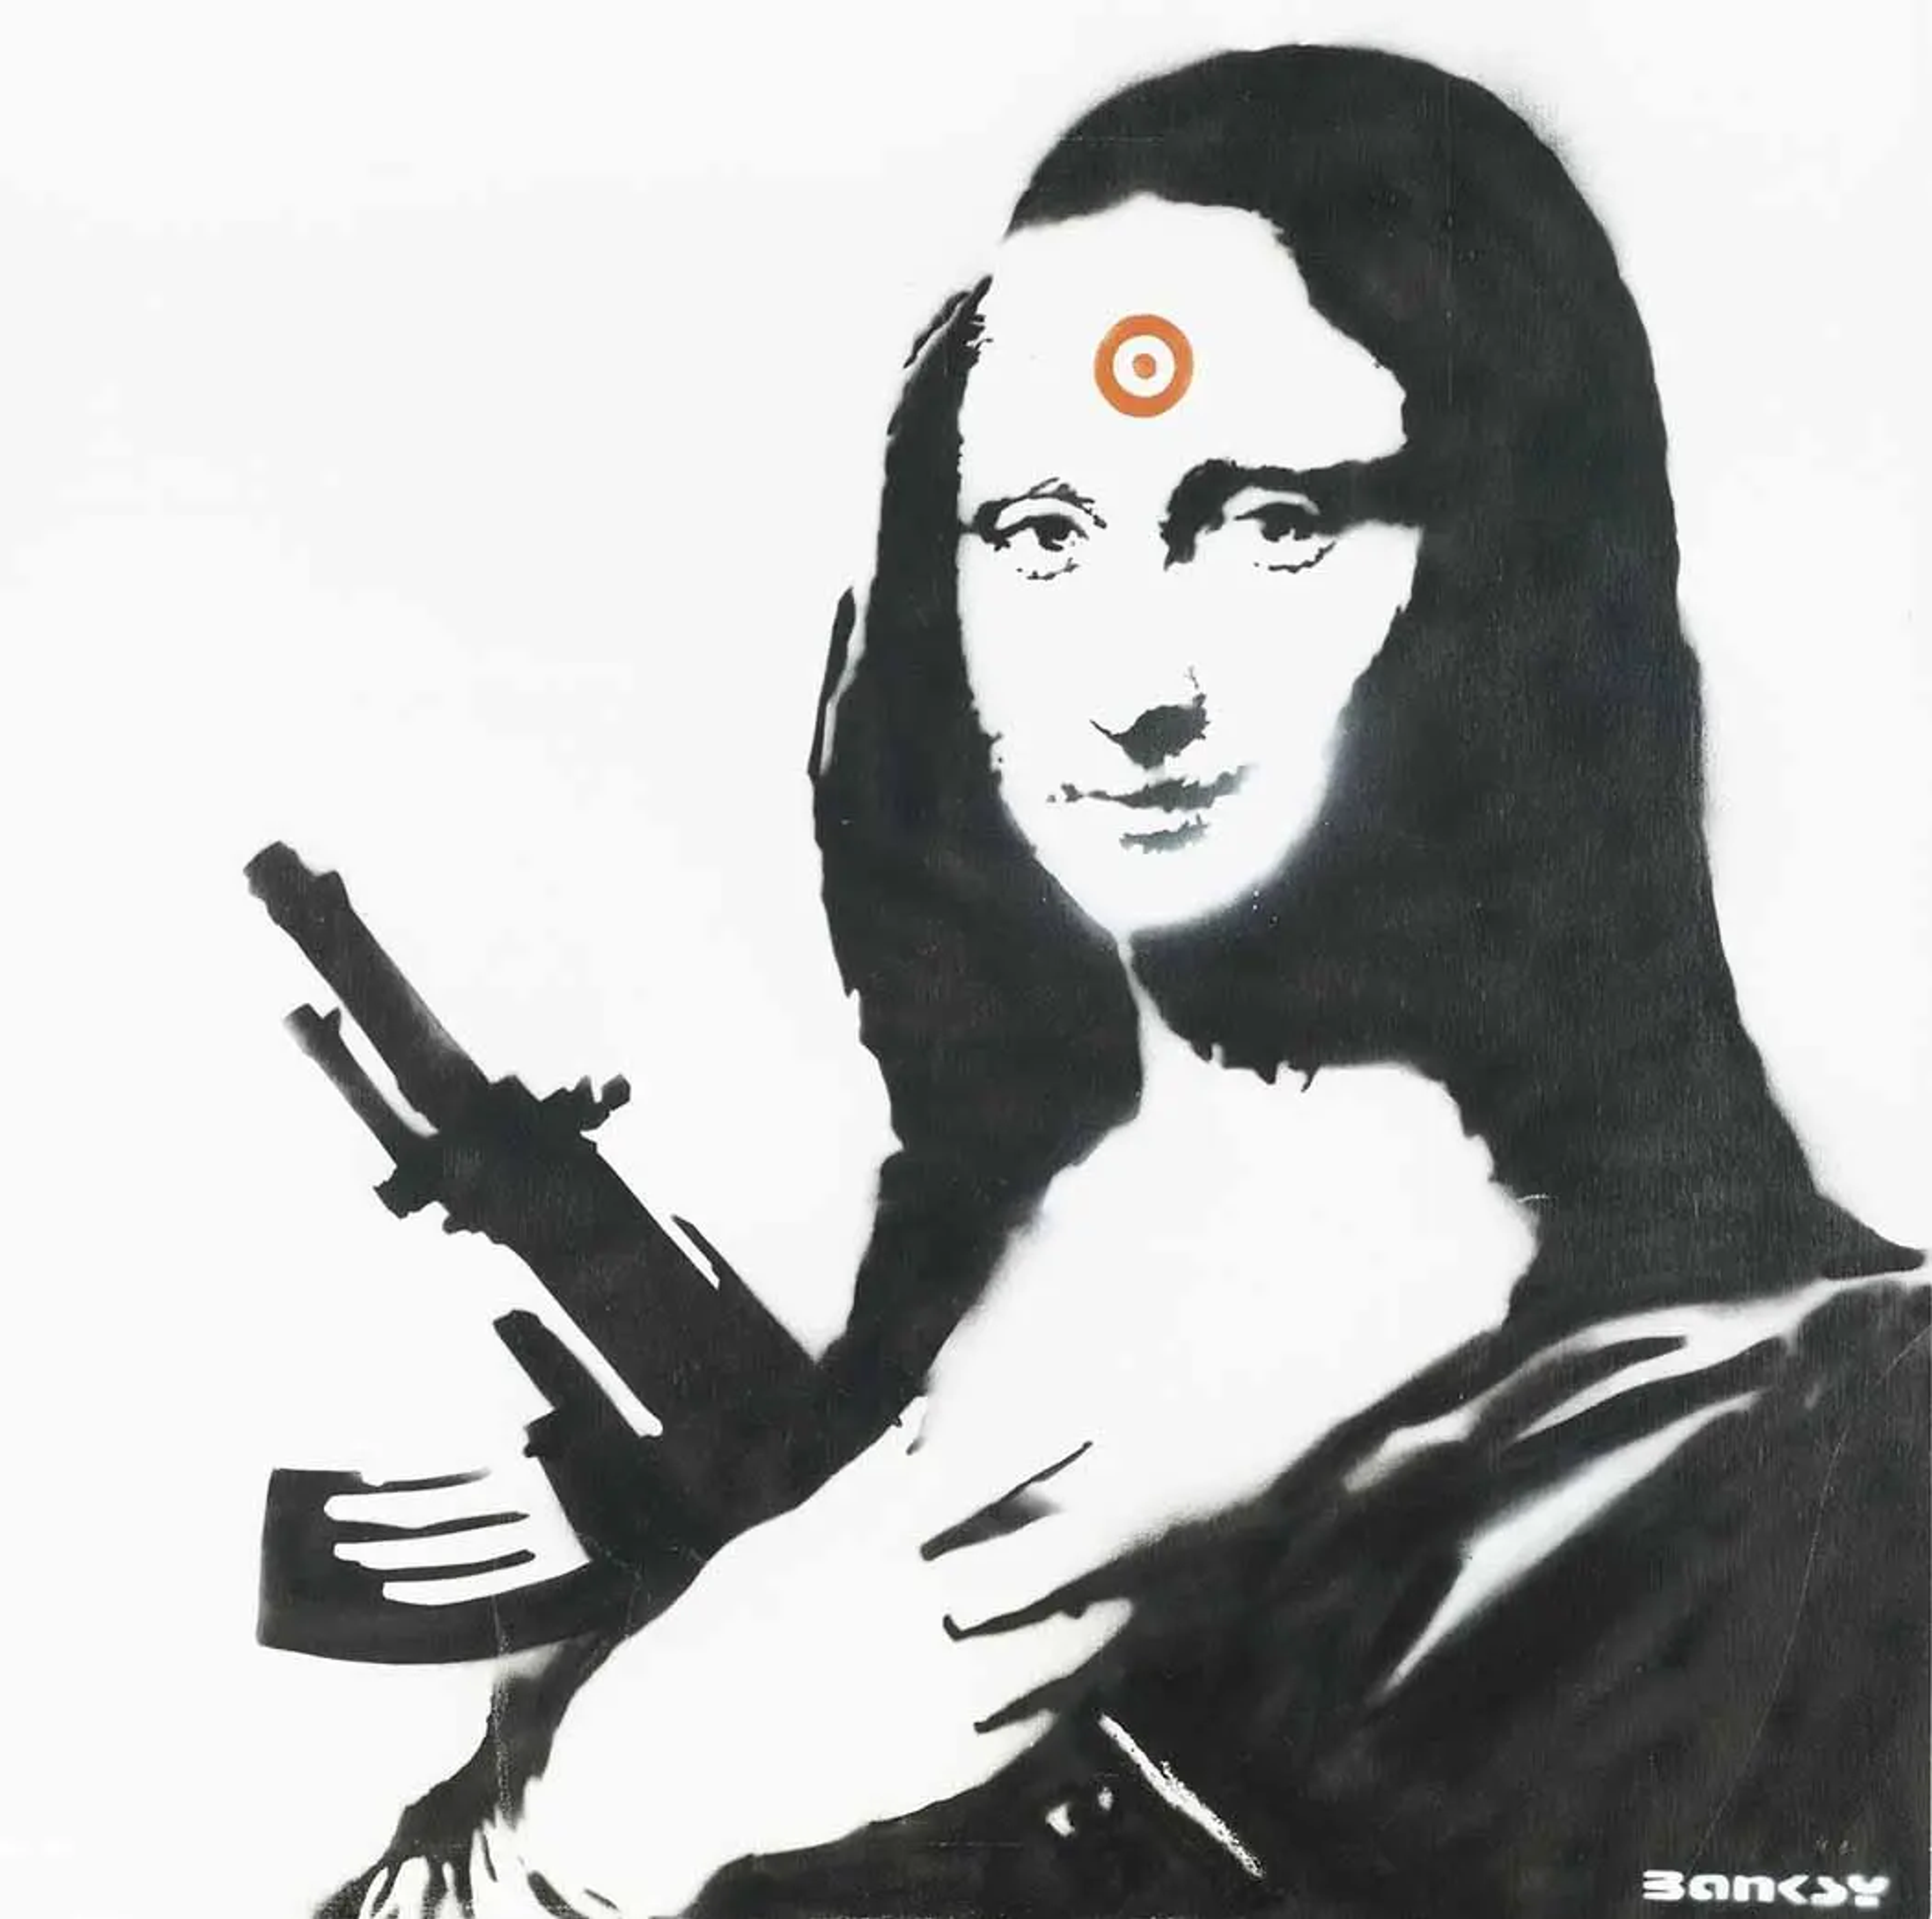 Rendered in monochrome with the exception of a red dot indicating the shooter’s point of aim, Mona Lisa With AK 47 is a spray painting produced by Bansky in 2000. The artwork displays the artist’s recognisable stencilled style while reimagining the famous female subject.